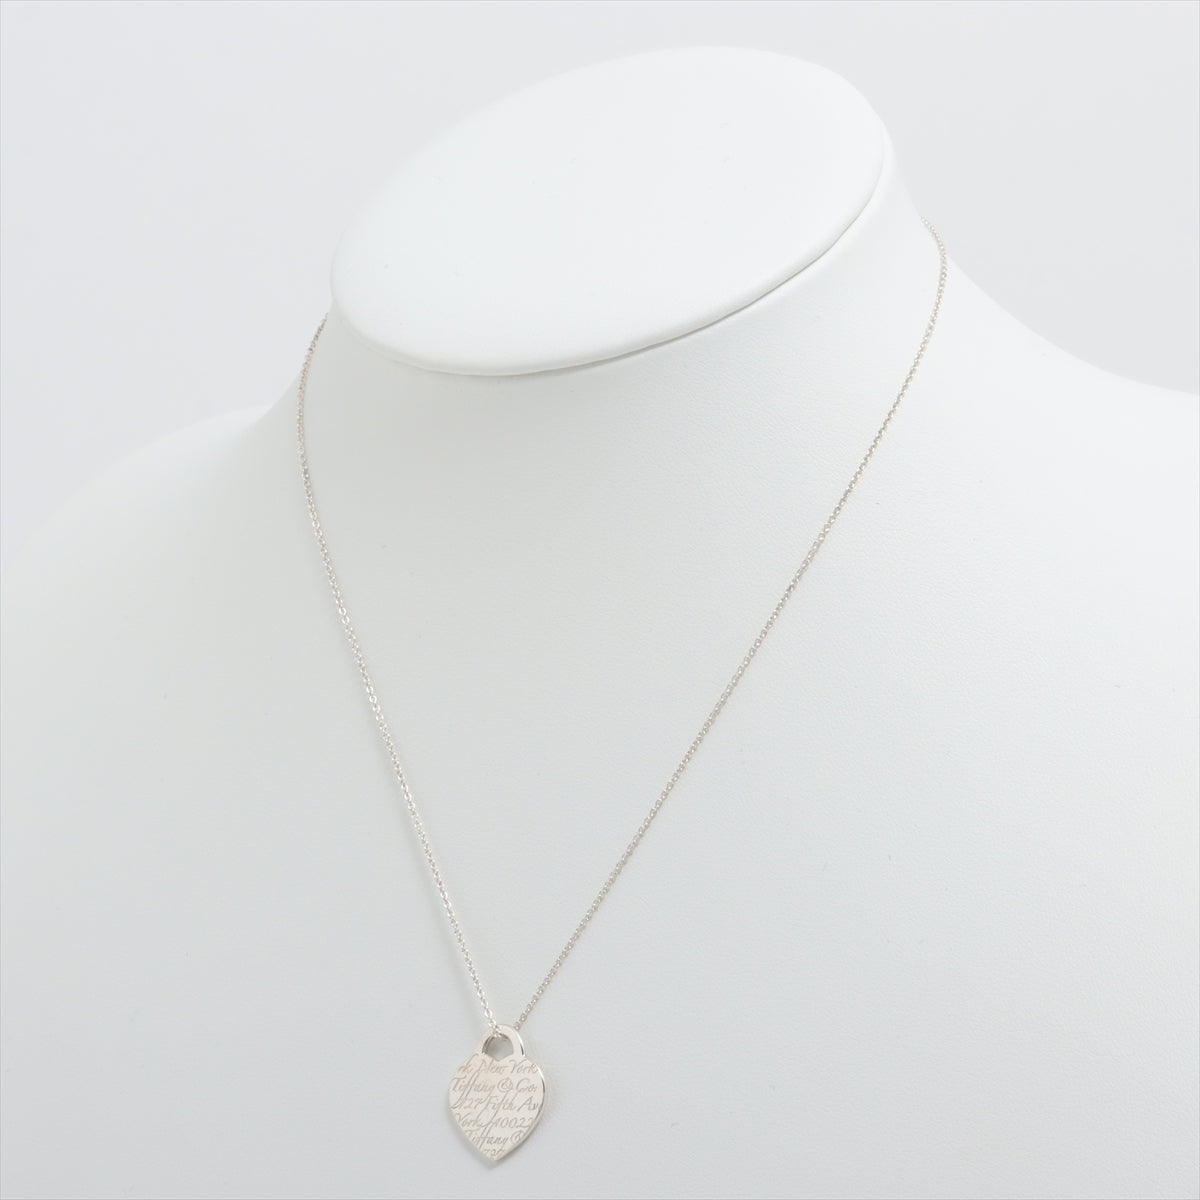 Tiffany Notes Heart Tag Necklace 925 3.5g Silver